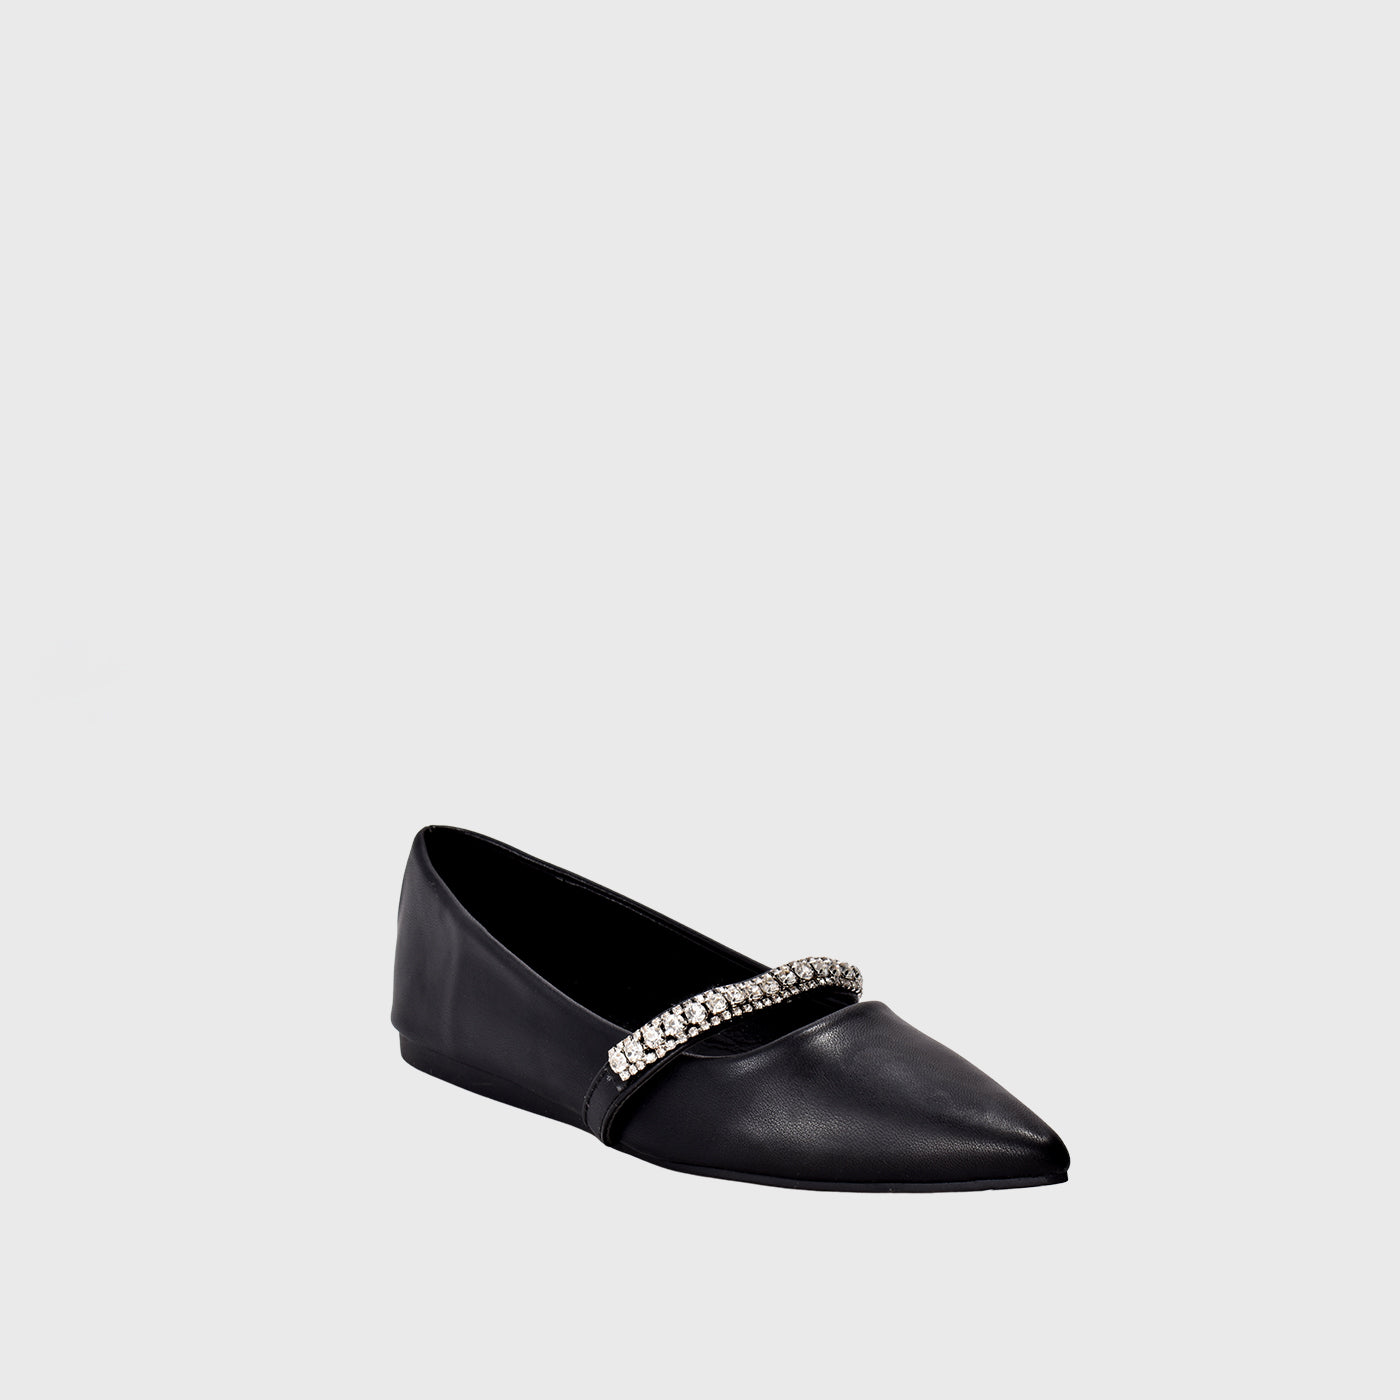 Black Leather Flat  Shoe With Shiny Buckle